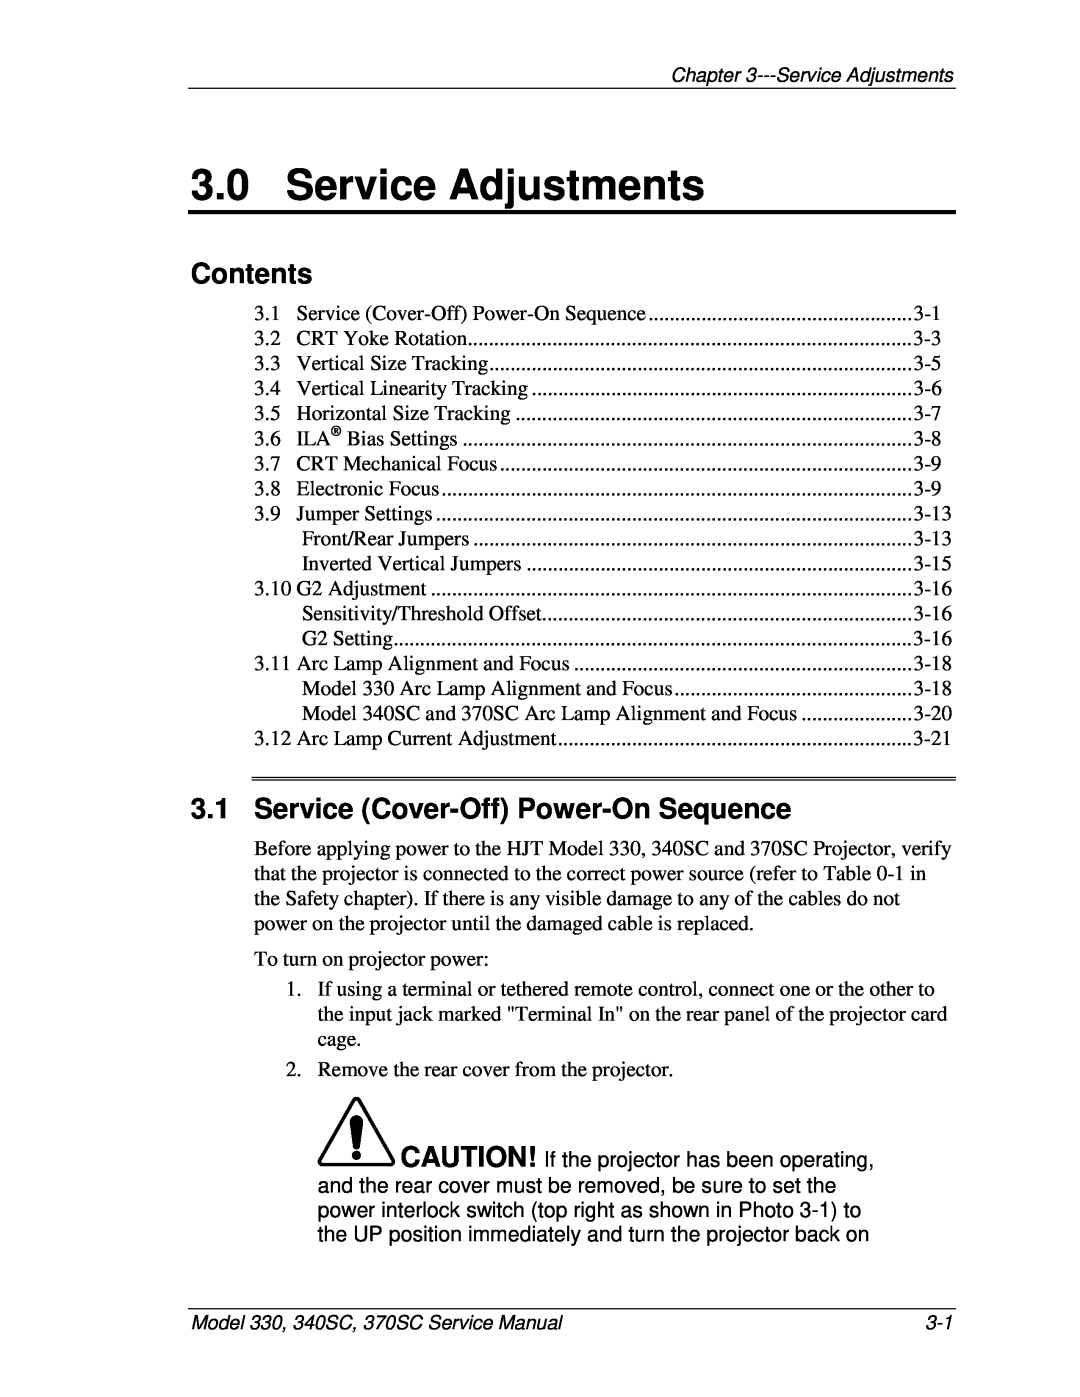 JVC 370 SC Service Adjustments, Service Cover-Off Power-On Sequence, Contents, Model 330, 340SC, 370SC Service Manual 